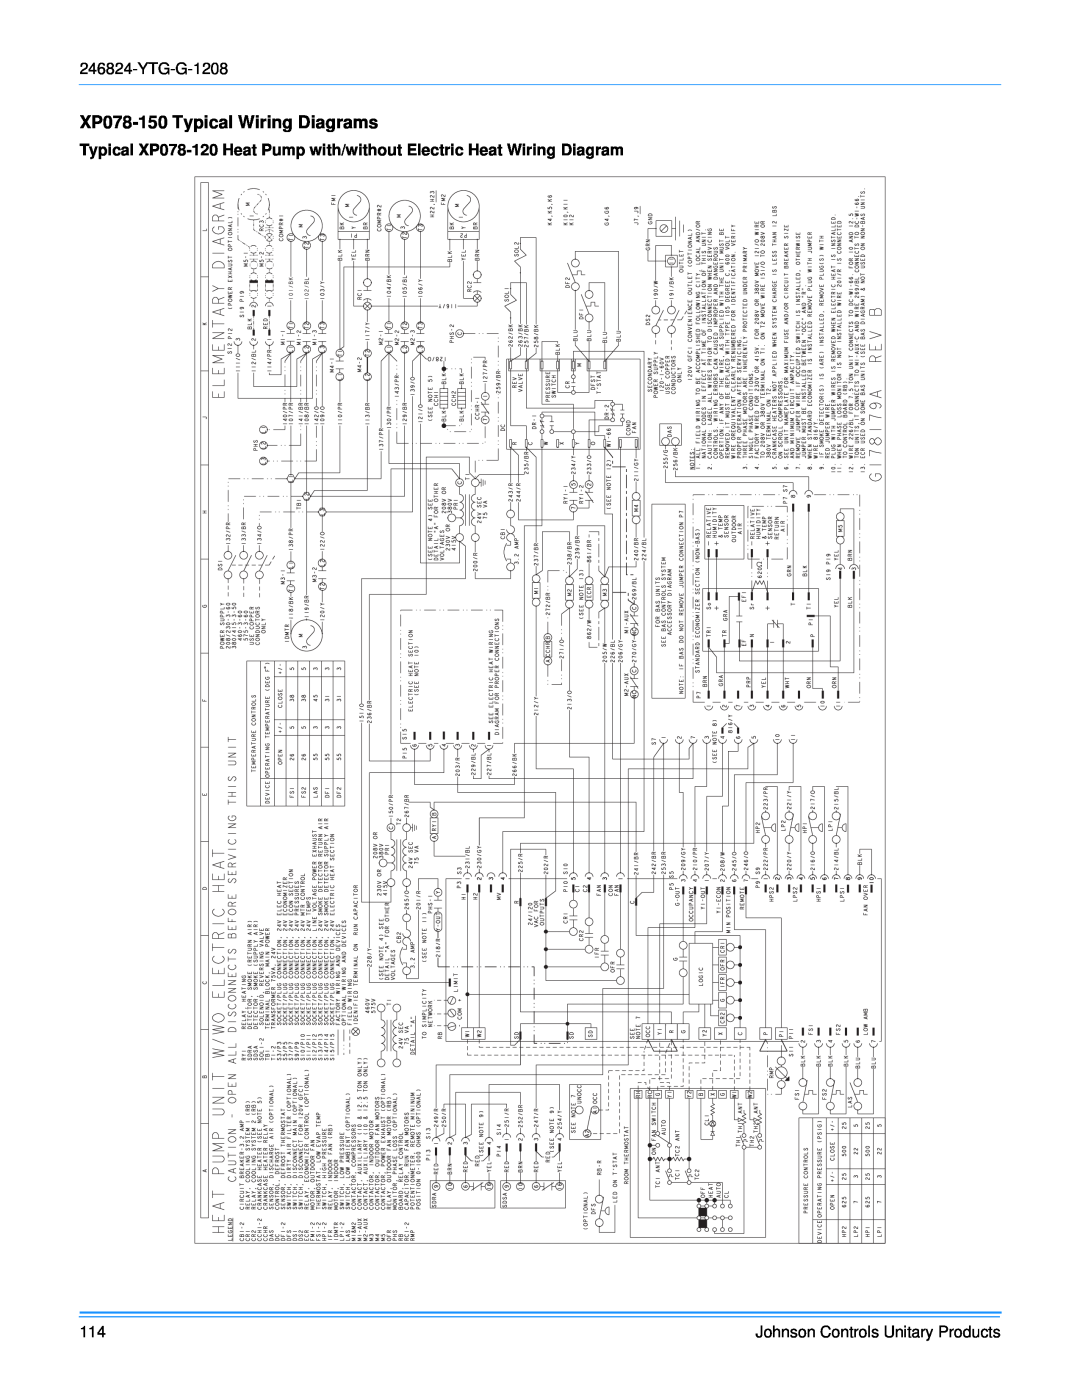 York R-410A manual XP078-150Typical Wiring Diagrams, Johnson Controls Unitary Products 